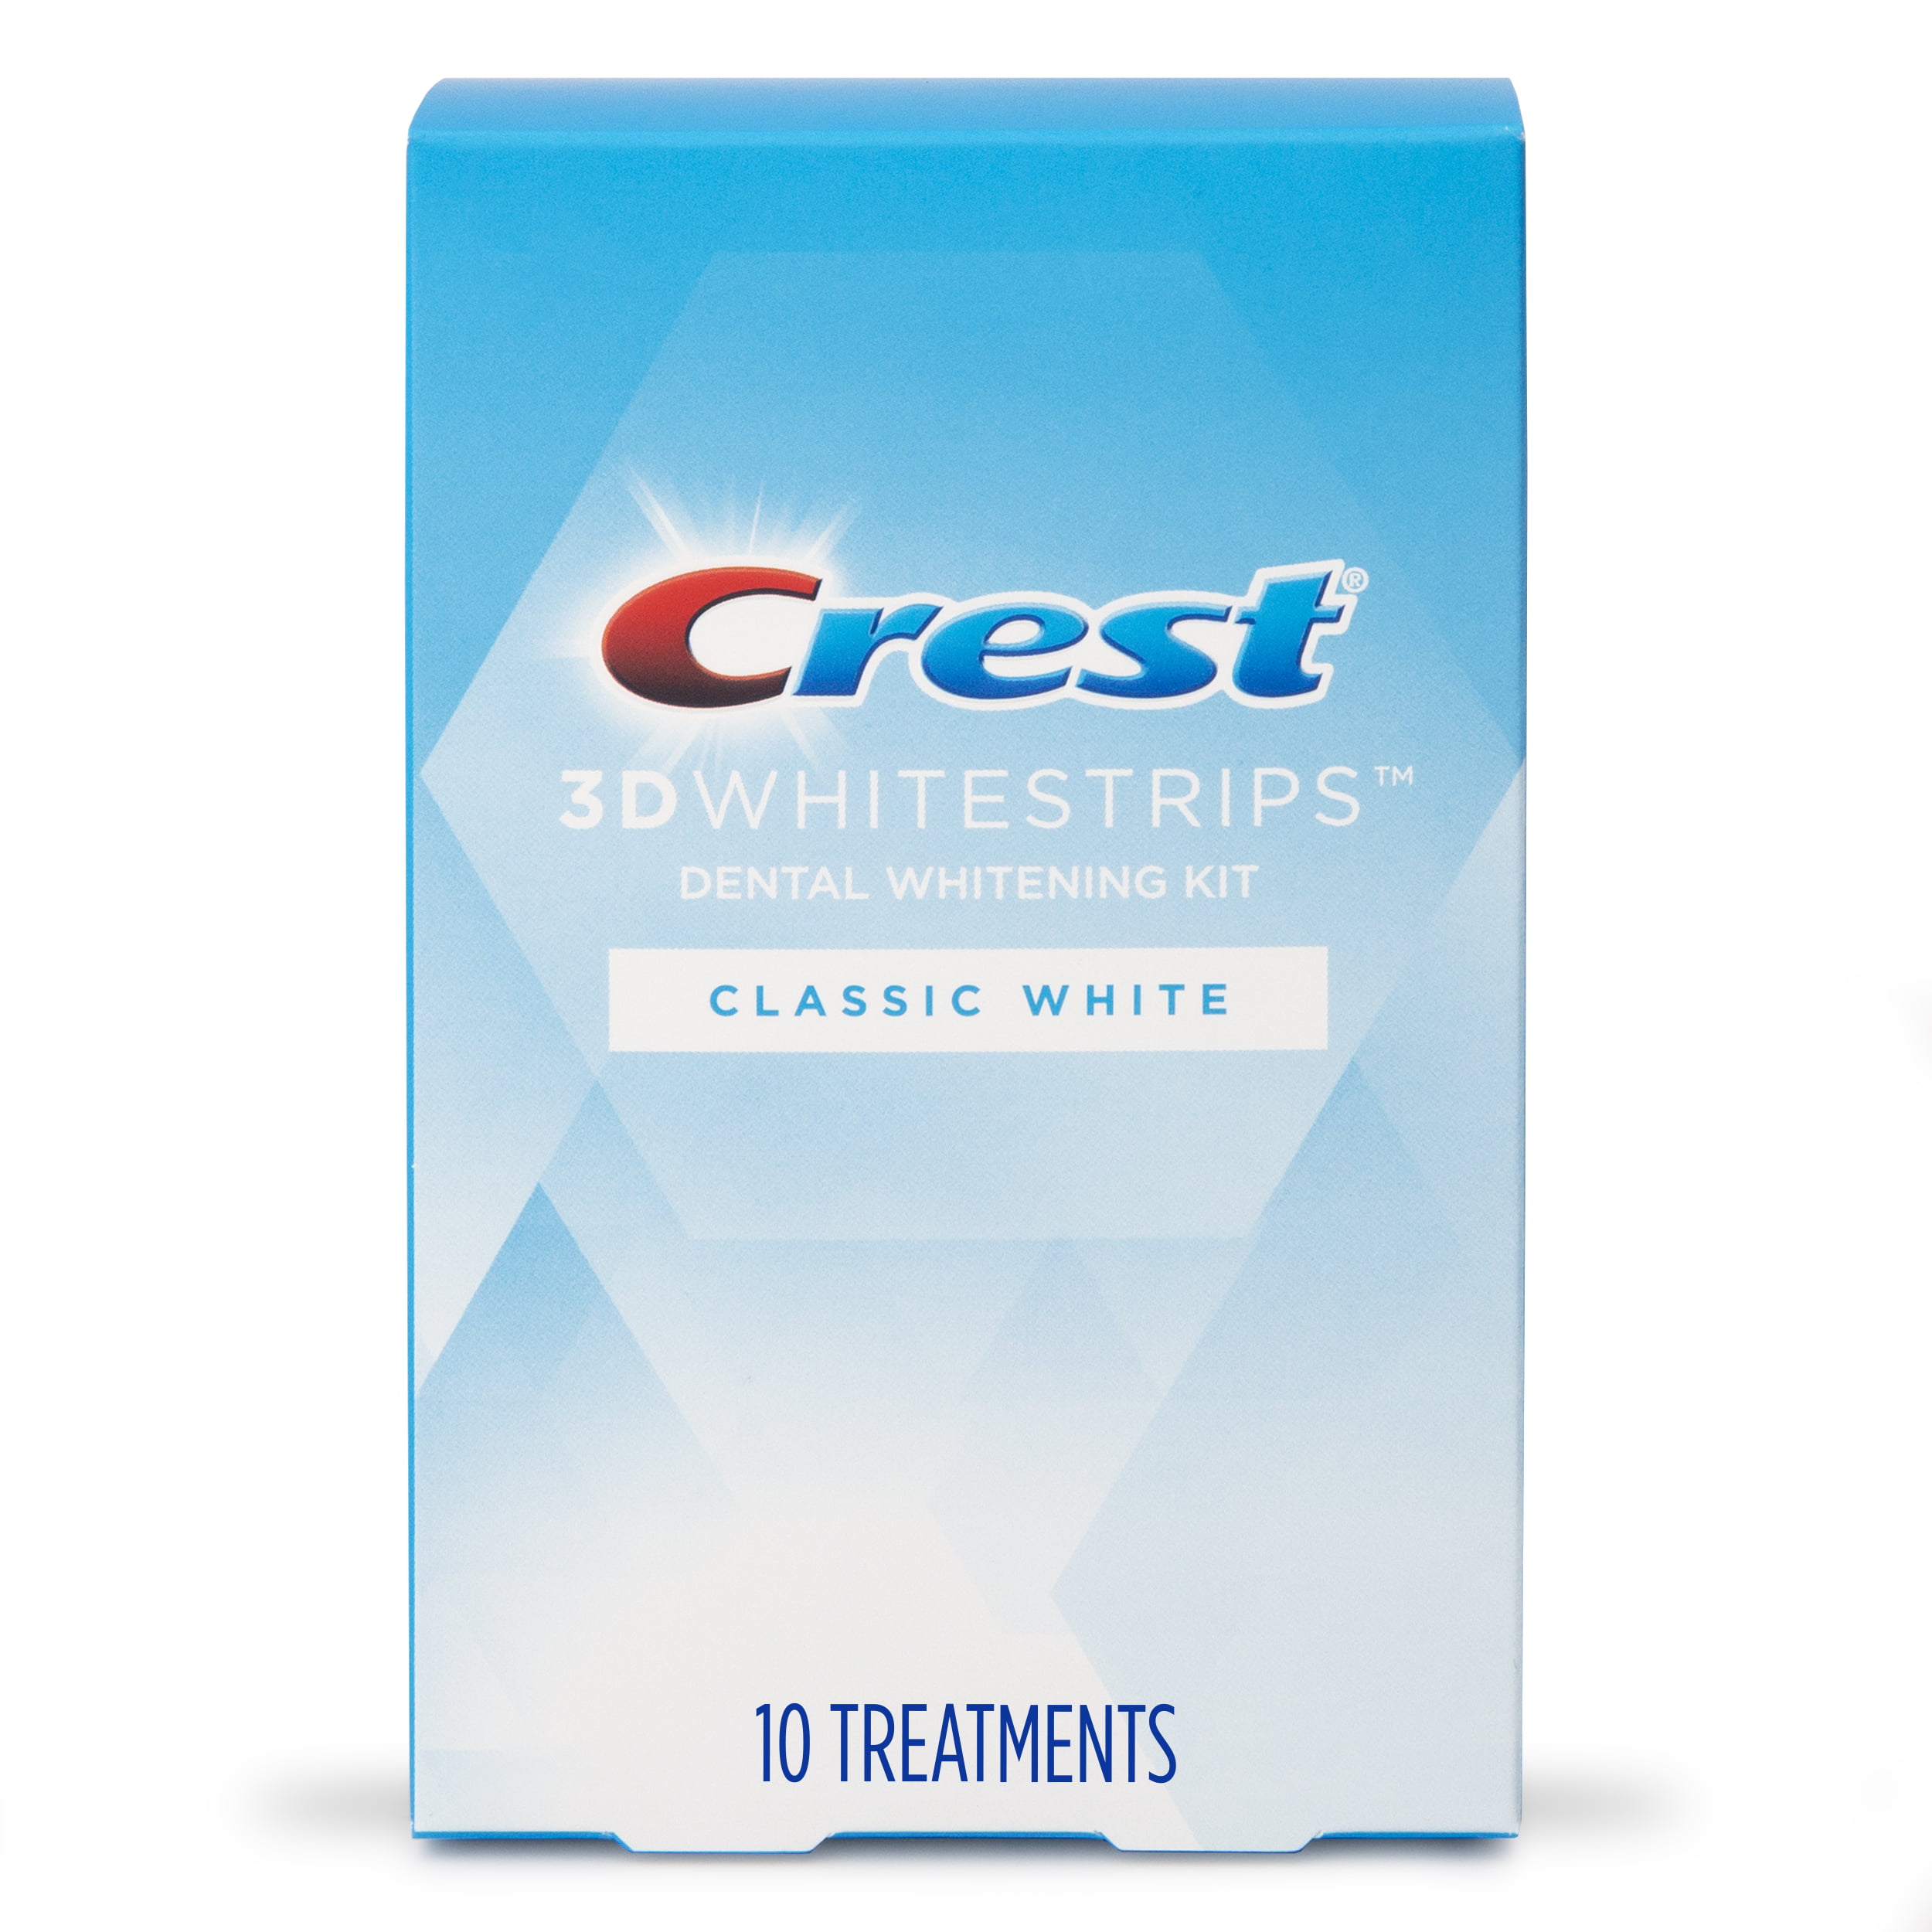 Crest 3DWhitestrips Classic White at Home Teeth Whitening, 20 Strips